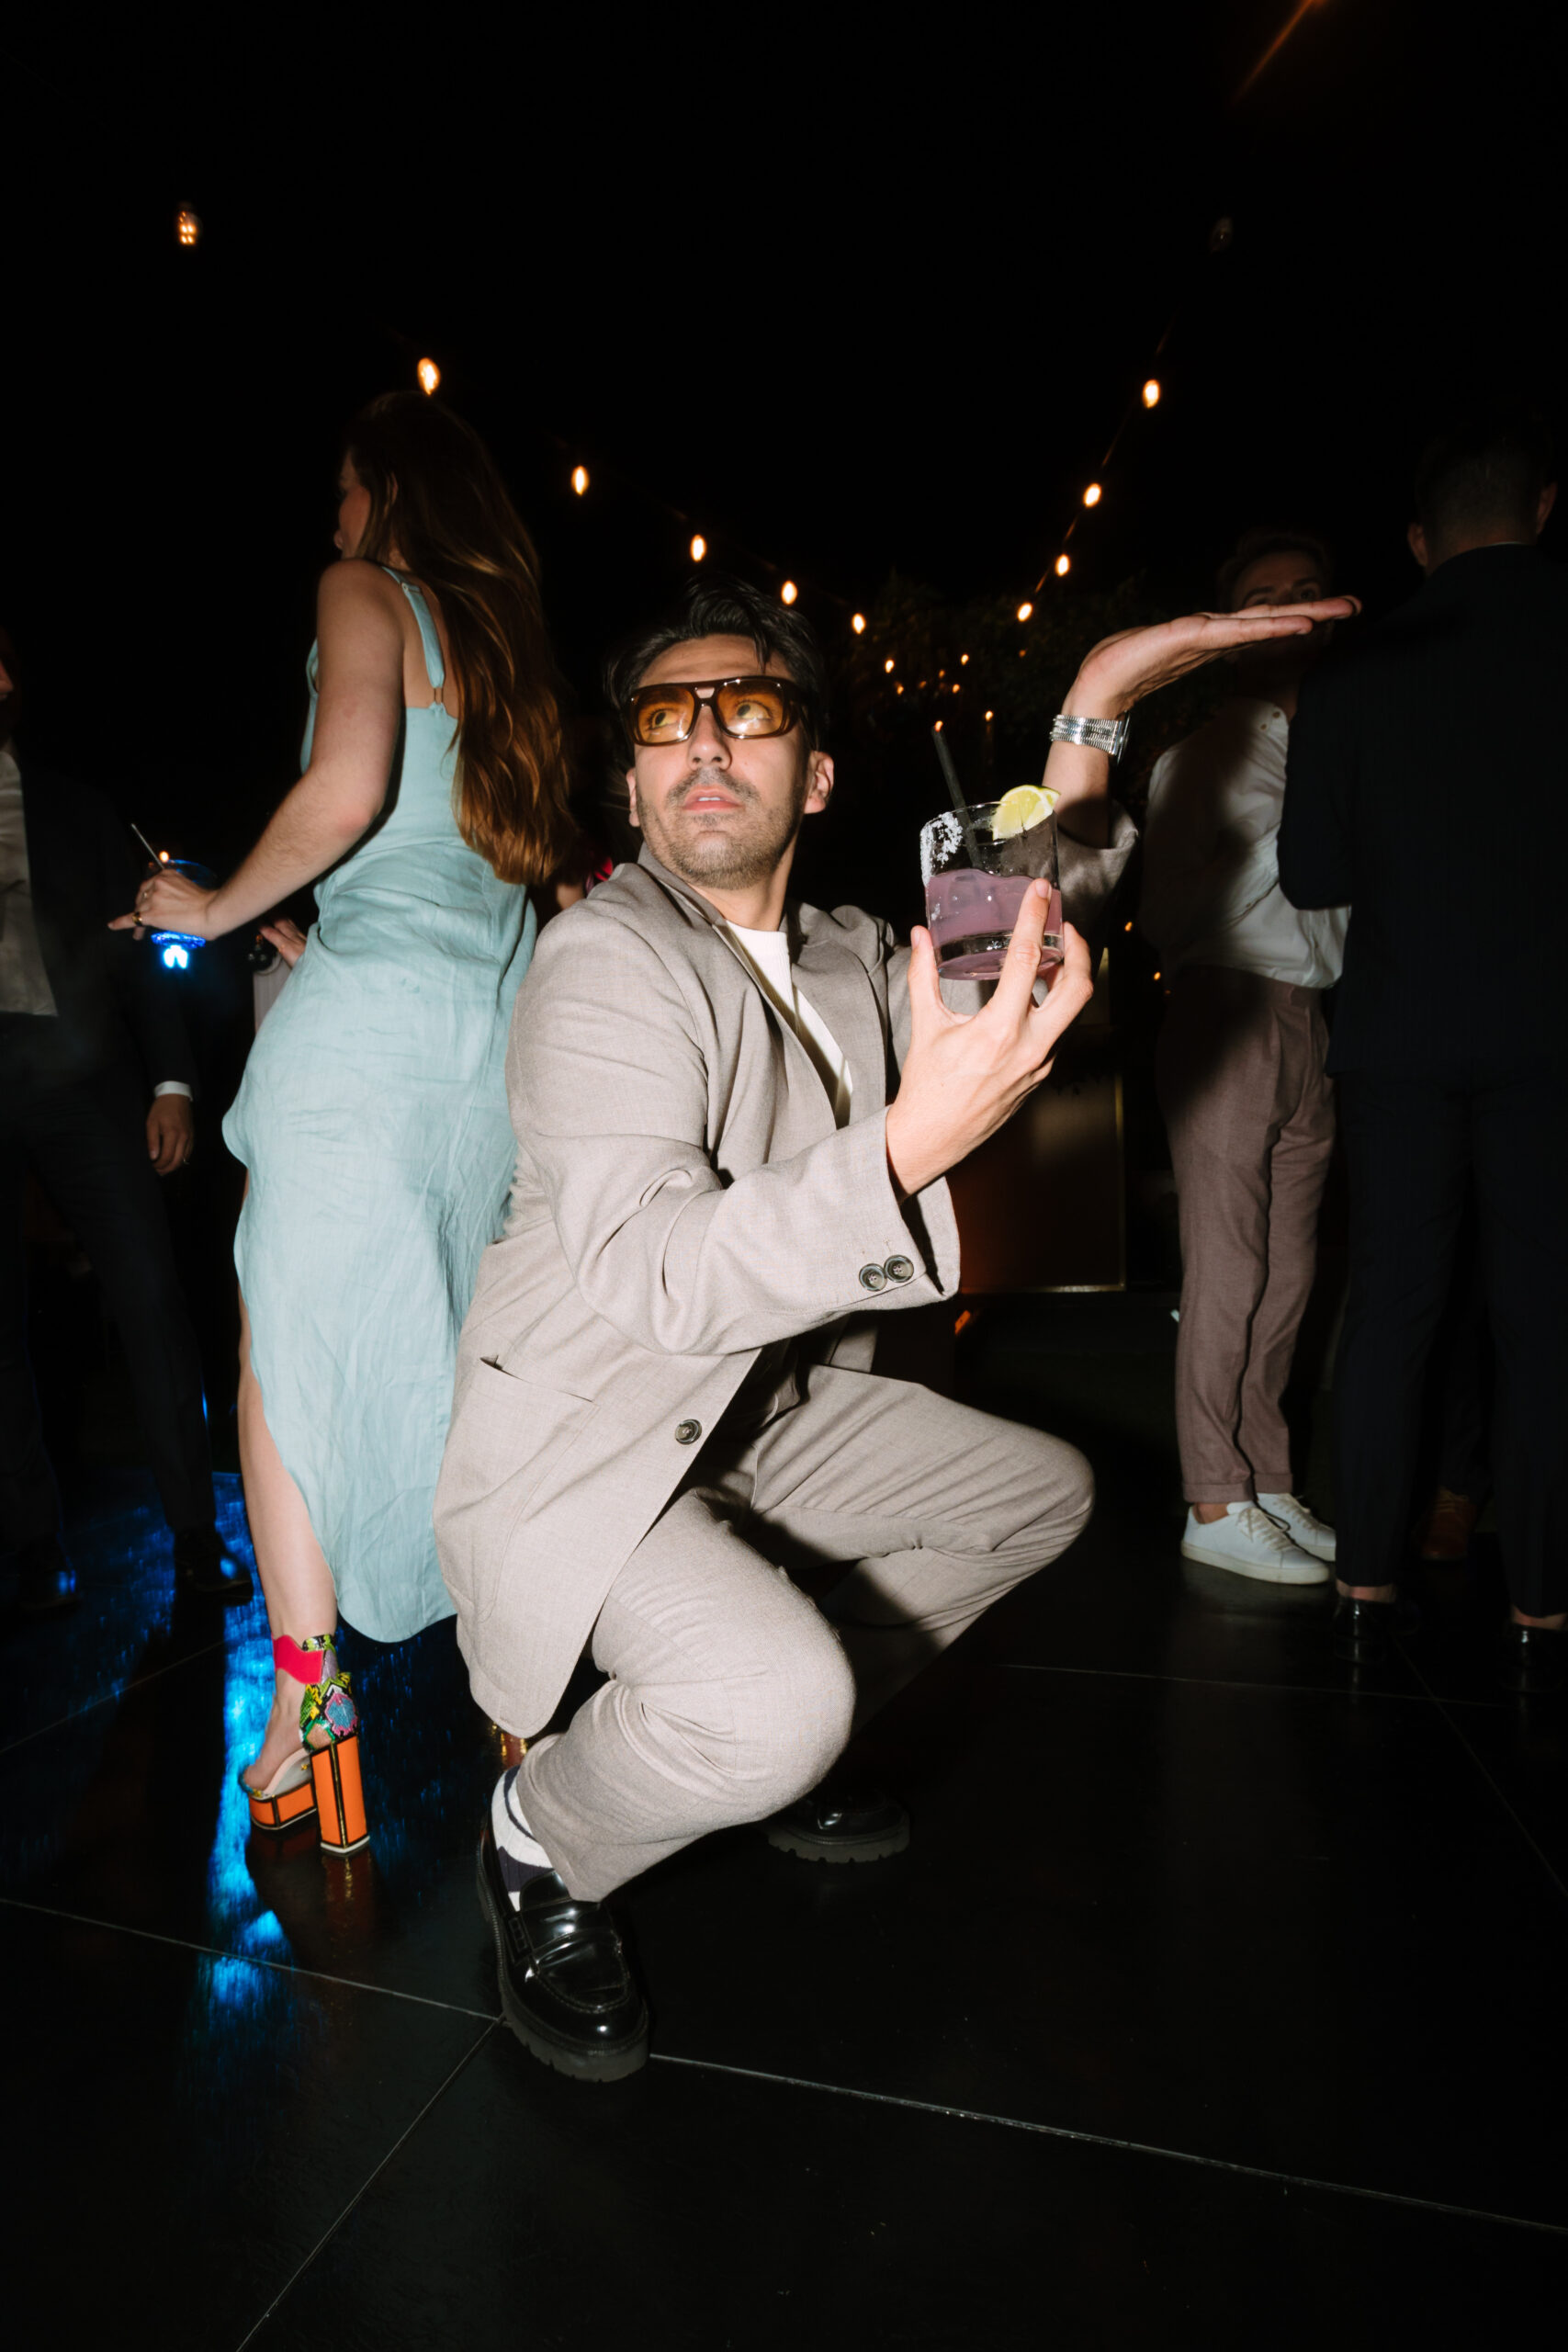 direct flash photo of wedding guest duckwalking on the dance floor with a cocktail in his hand